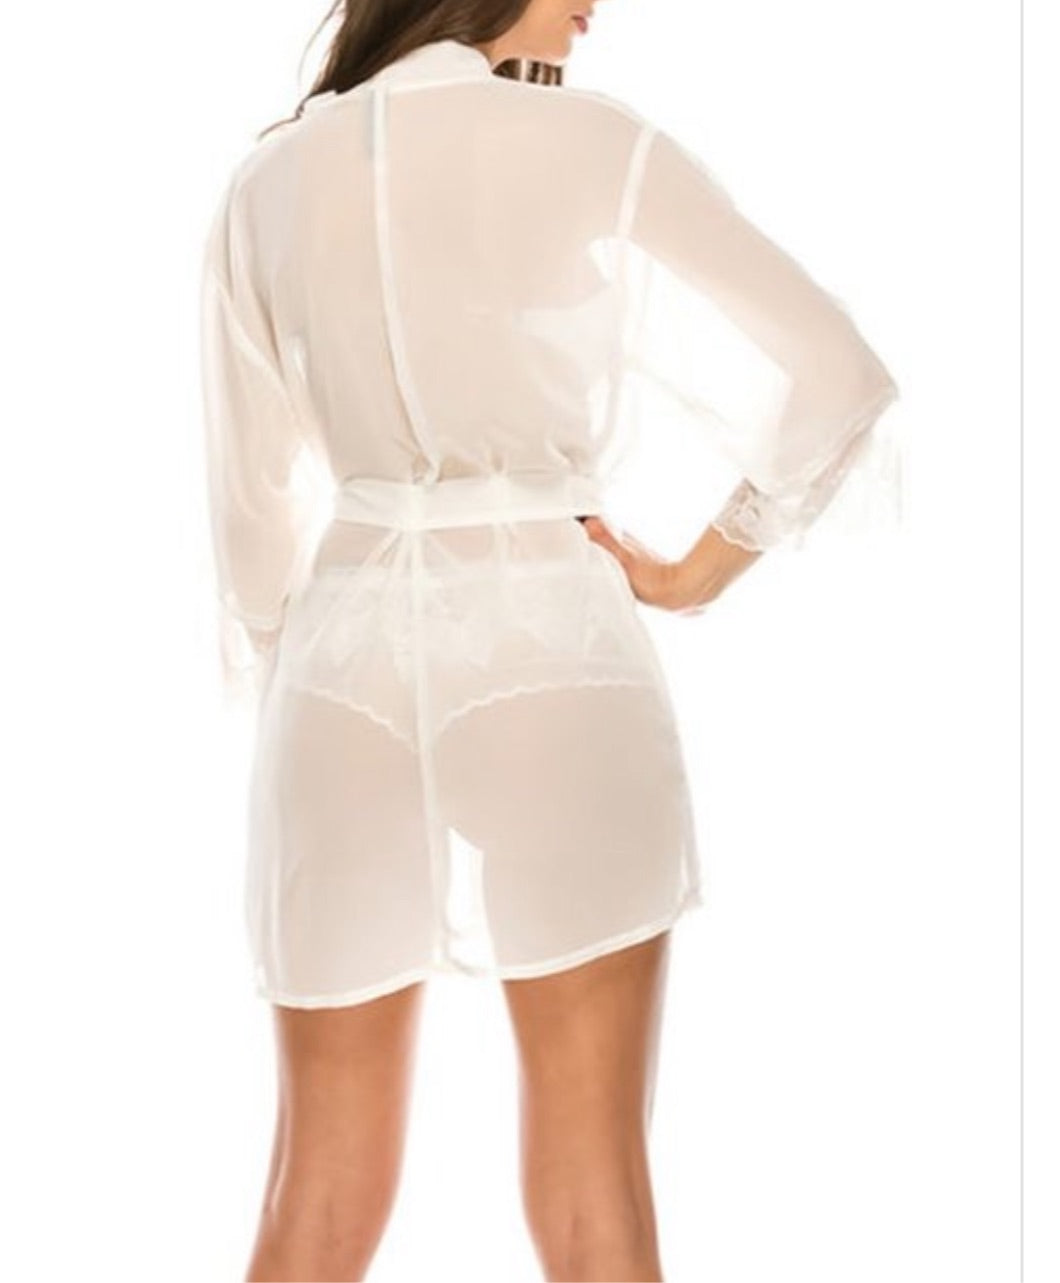 Sola Mesh Robe lace with Thong